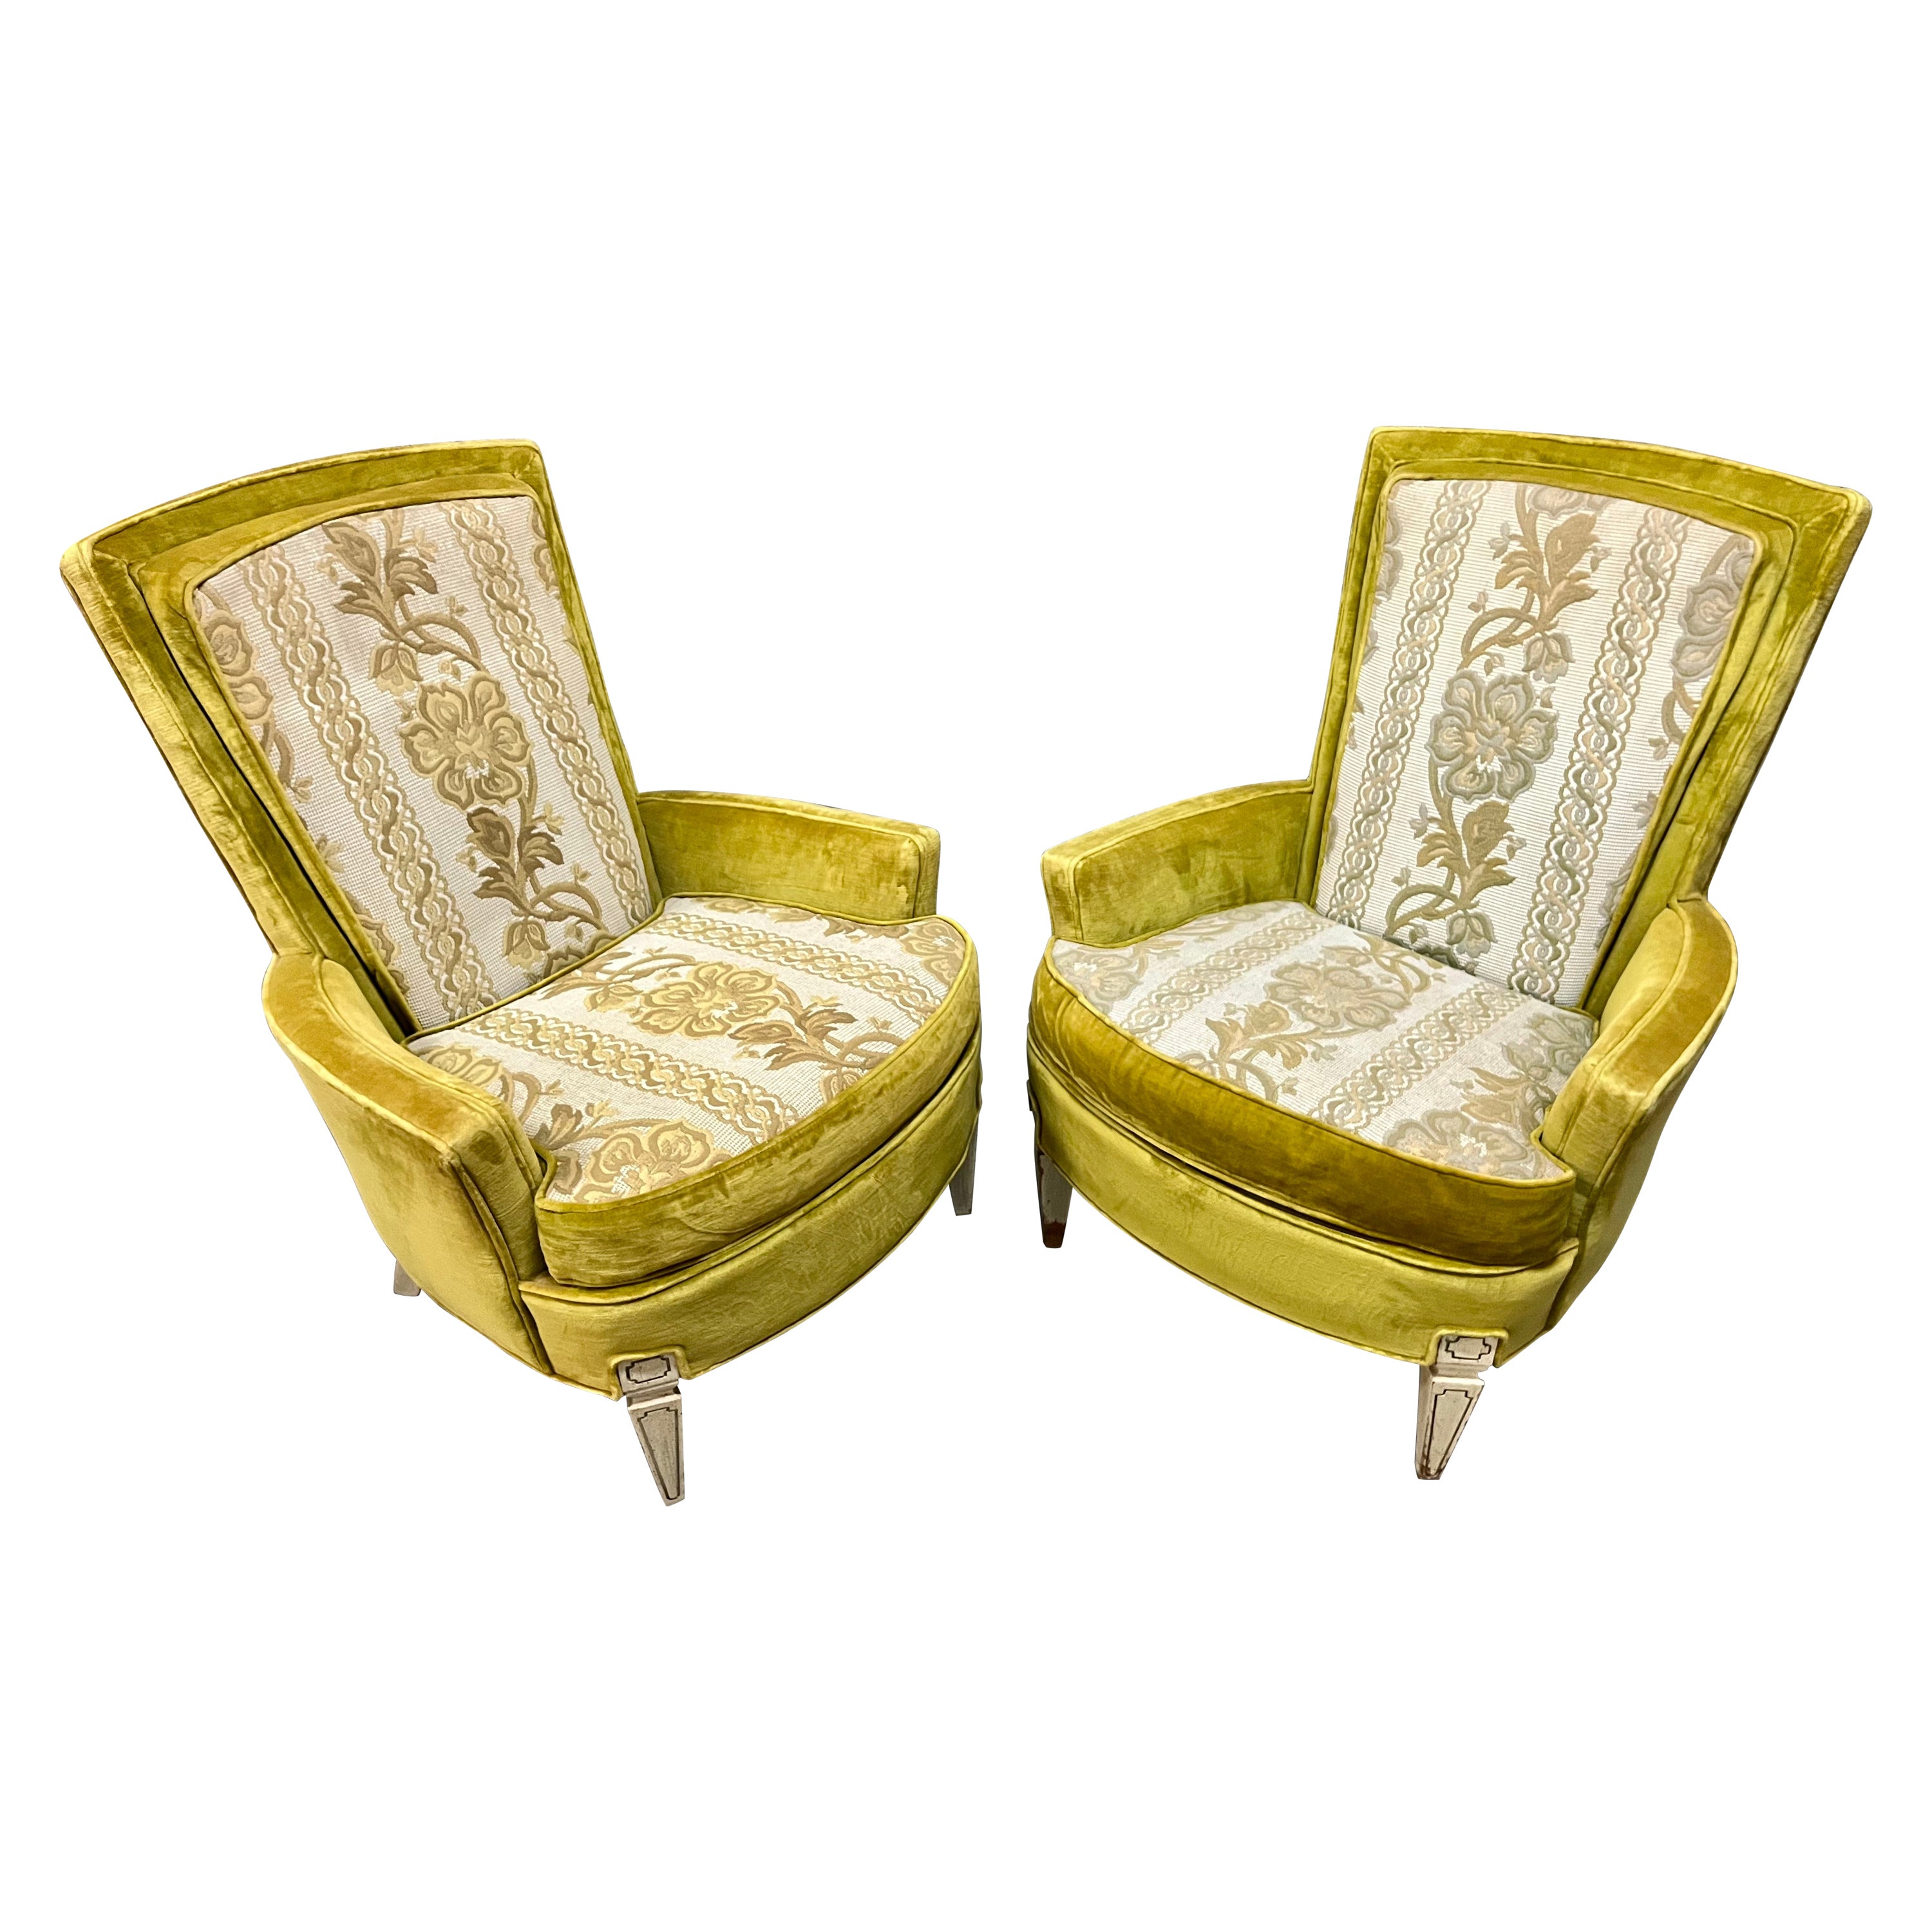 A Pair of Hollywood Regency Upholstered Lounge Chairs by Silver Craft. C. 1960s